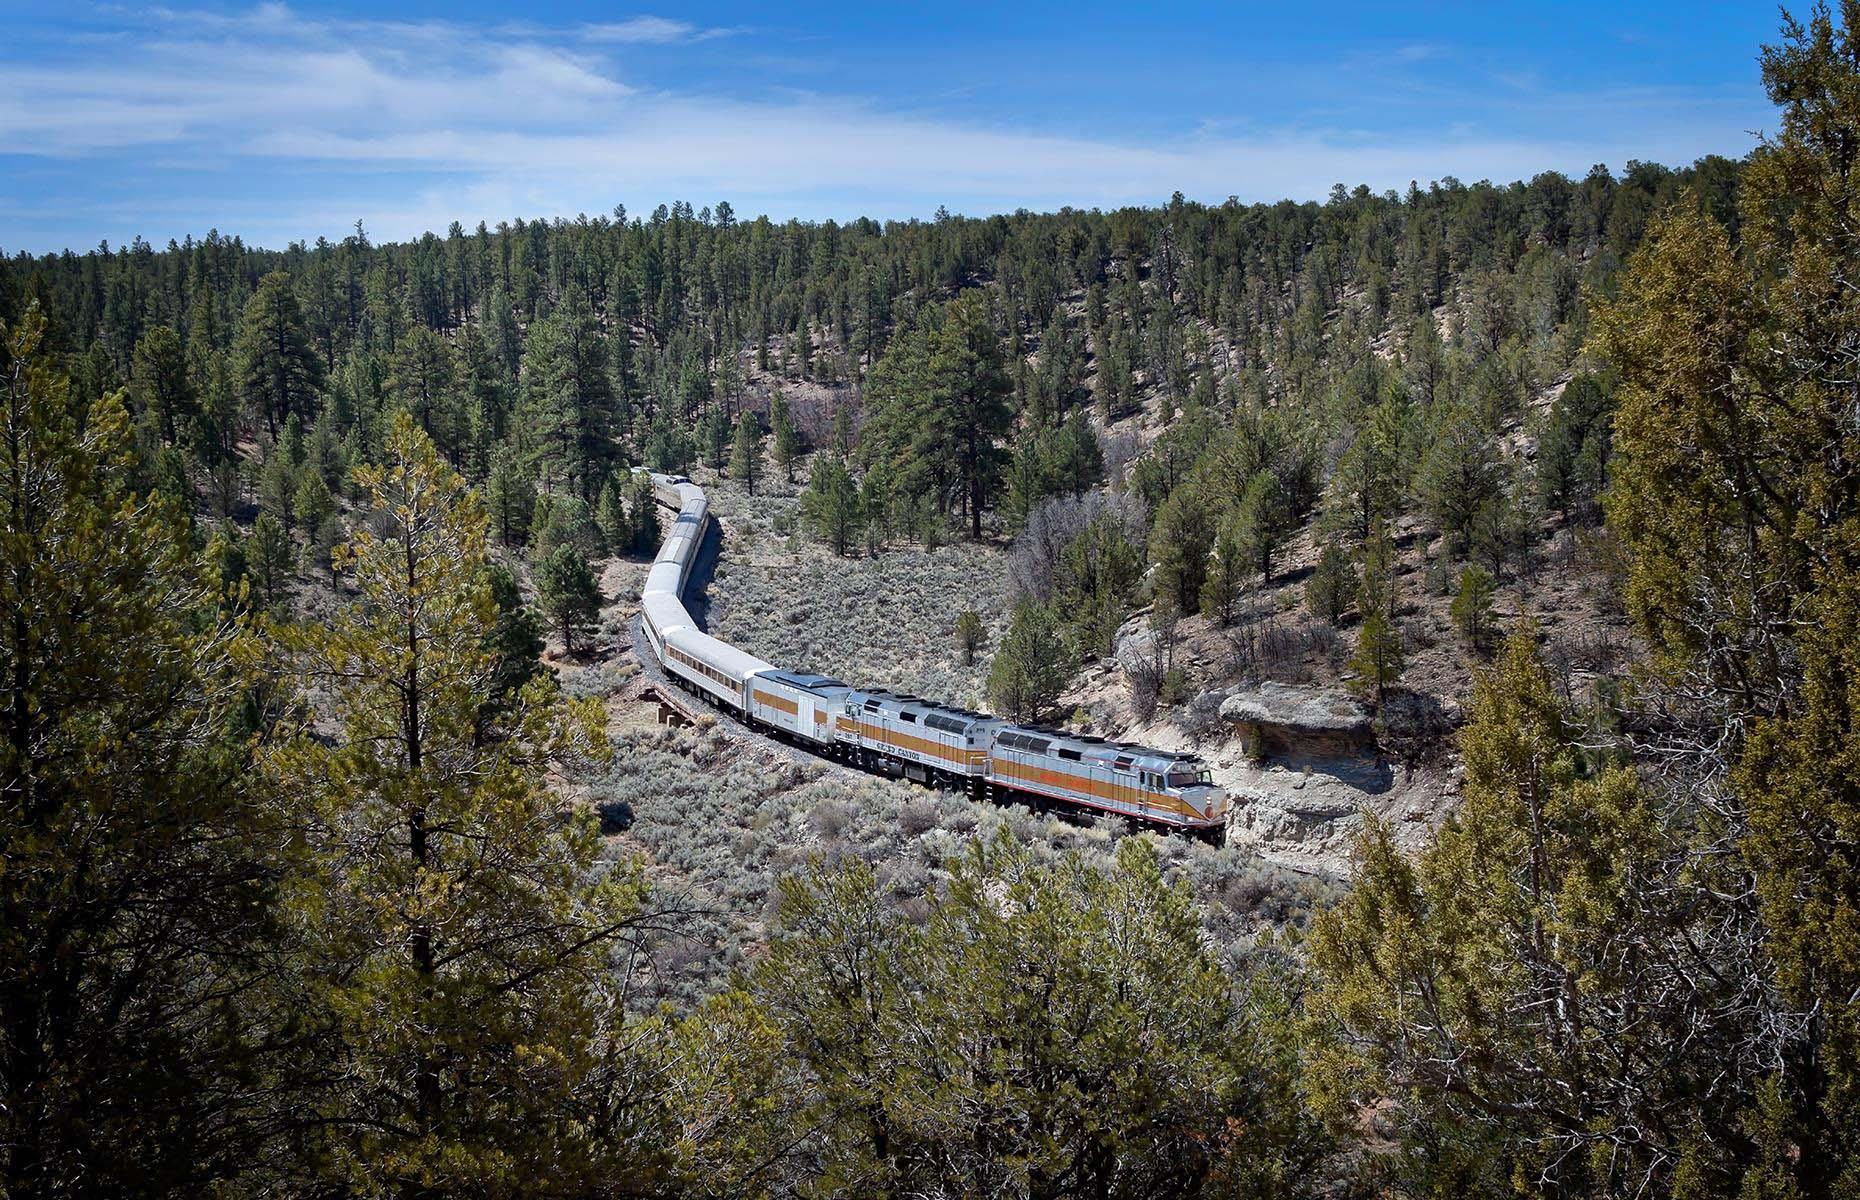 <p>The trip on the <a href="https://www.thetrain.com/">Grand Canyon Railway</a> begins in Williams, a small town 30 miles (48km) west of Flagstaff. Meandering its way through ponderosa pine forests and open prairie, the train terminates in Grand Canyon Village on the South Rim of the Grand Canyon National Park, before heading back to Williams. The train departs at 9:30am daily.</p>